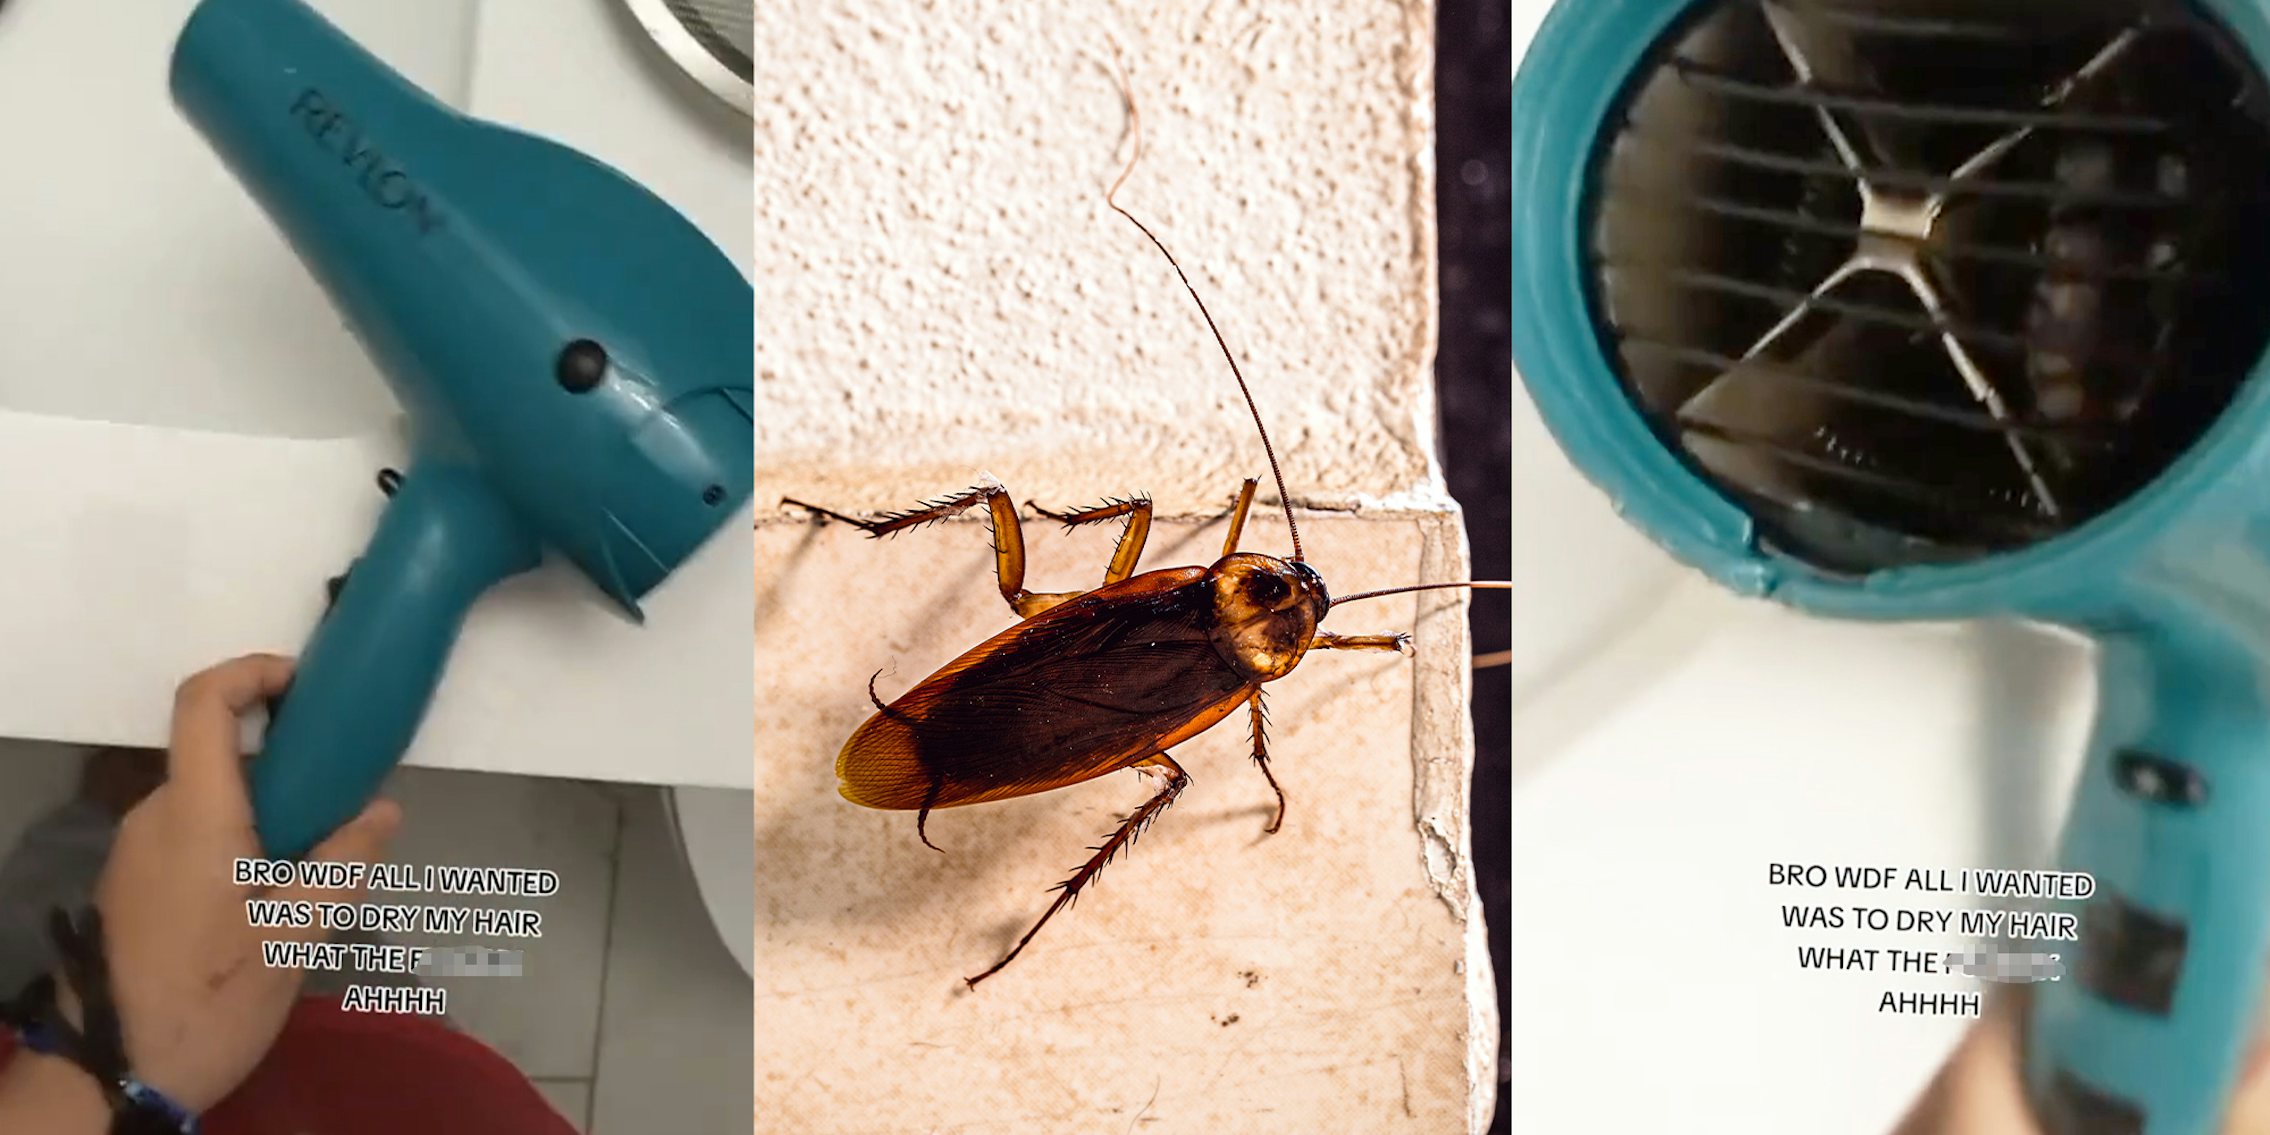 Woman finds cockroach in hair dryer